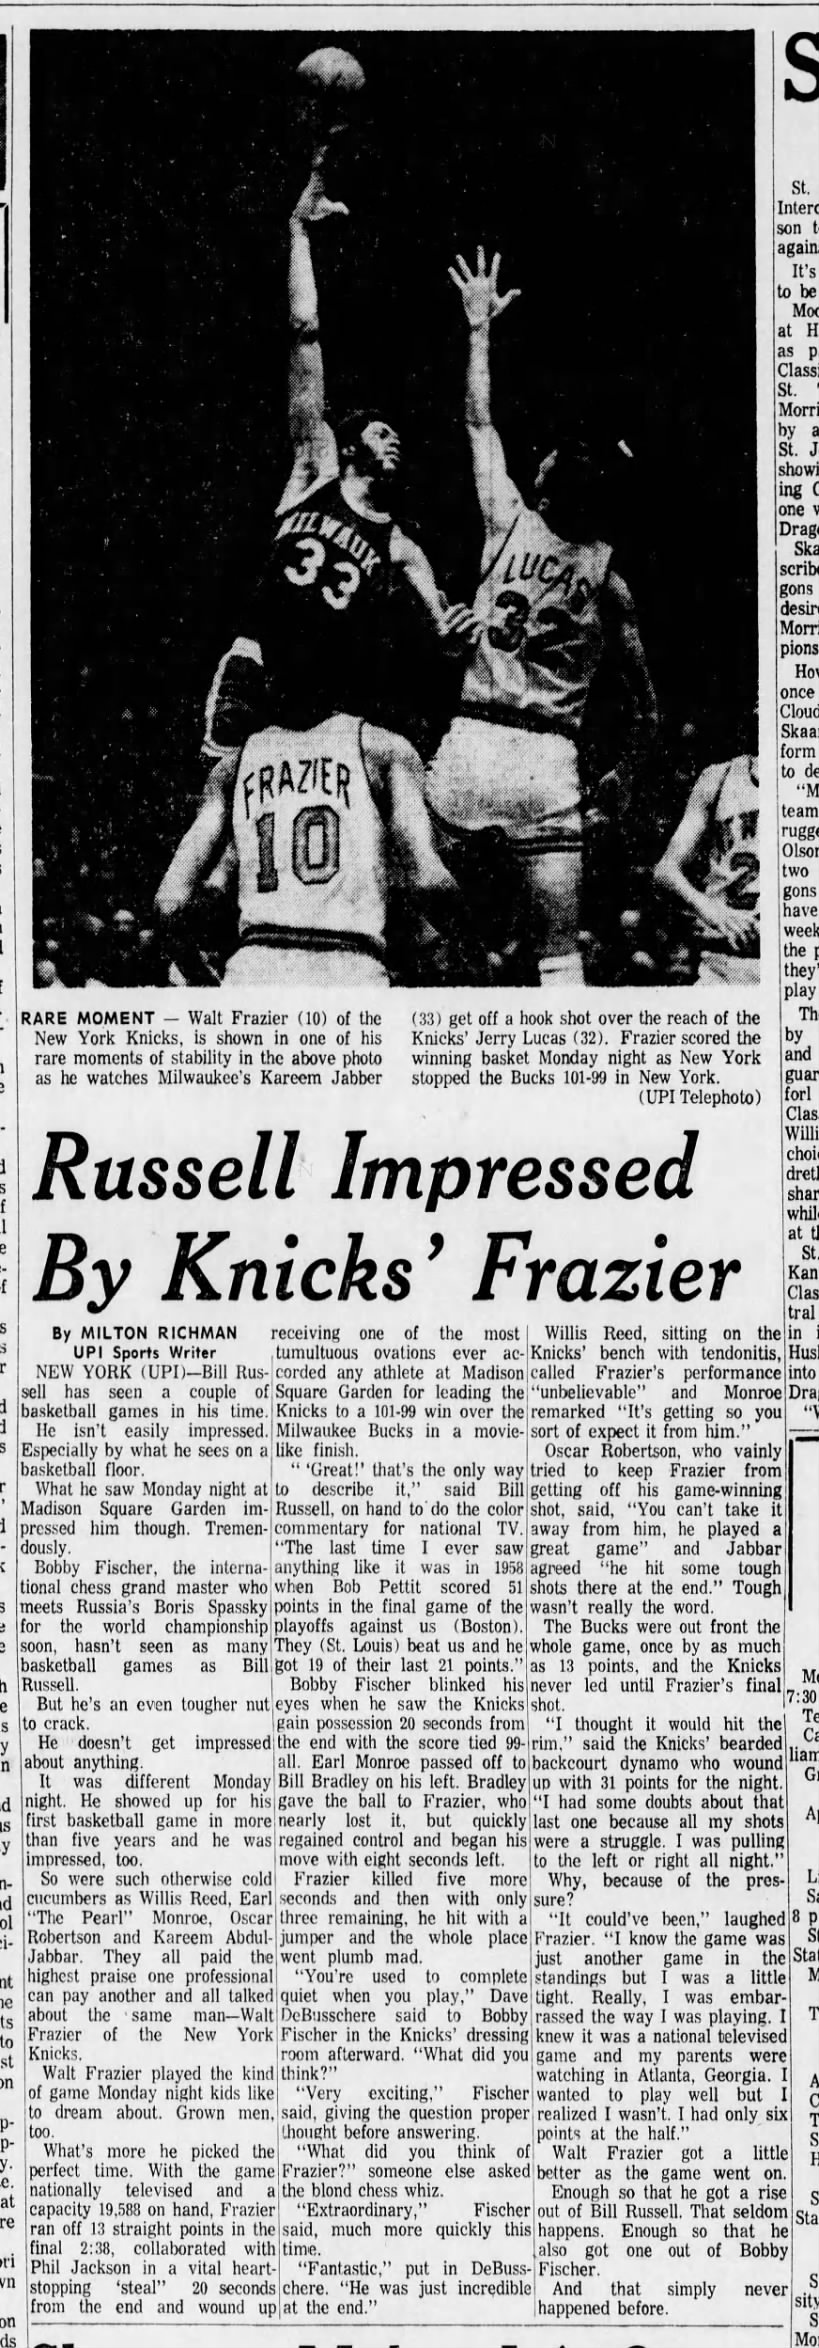 Russell Impressed By Knicks' Frazier